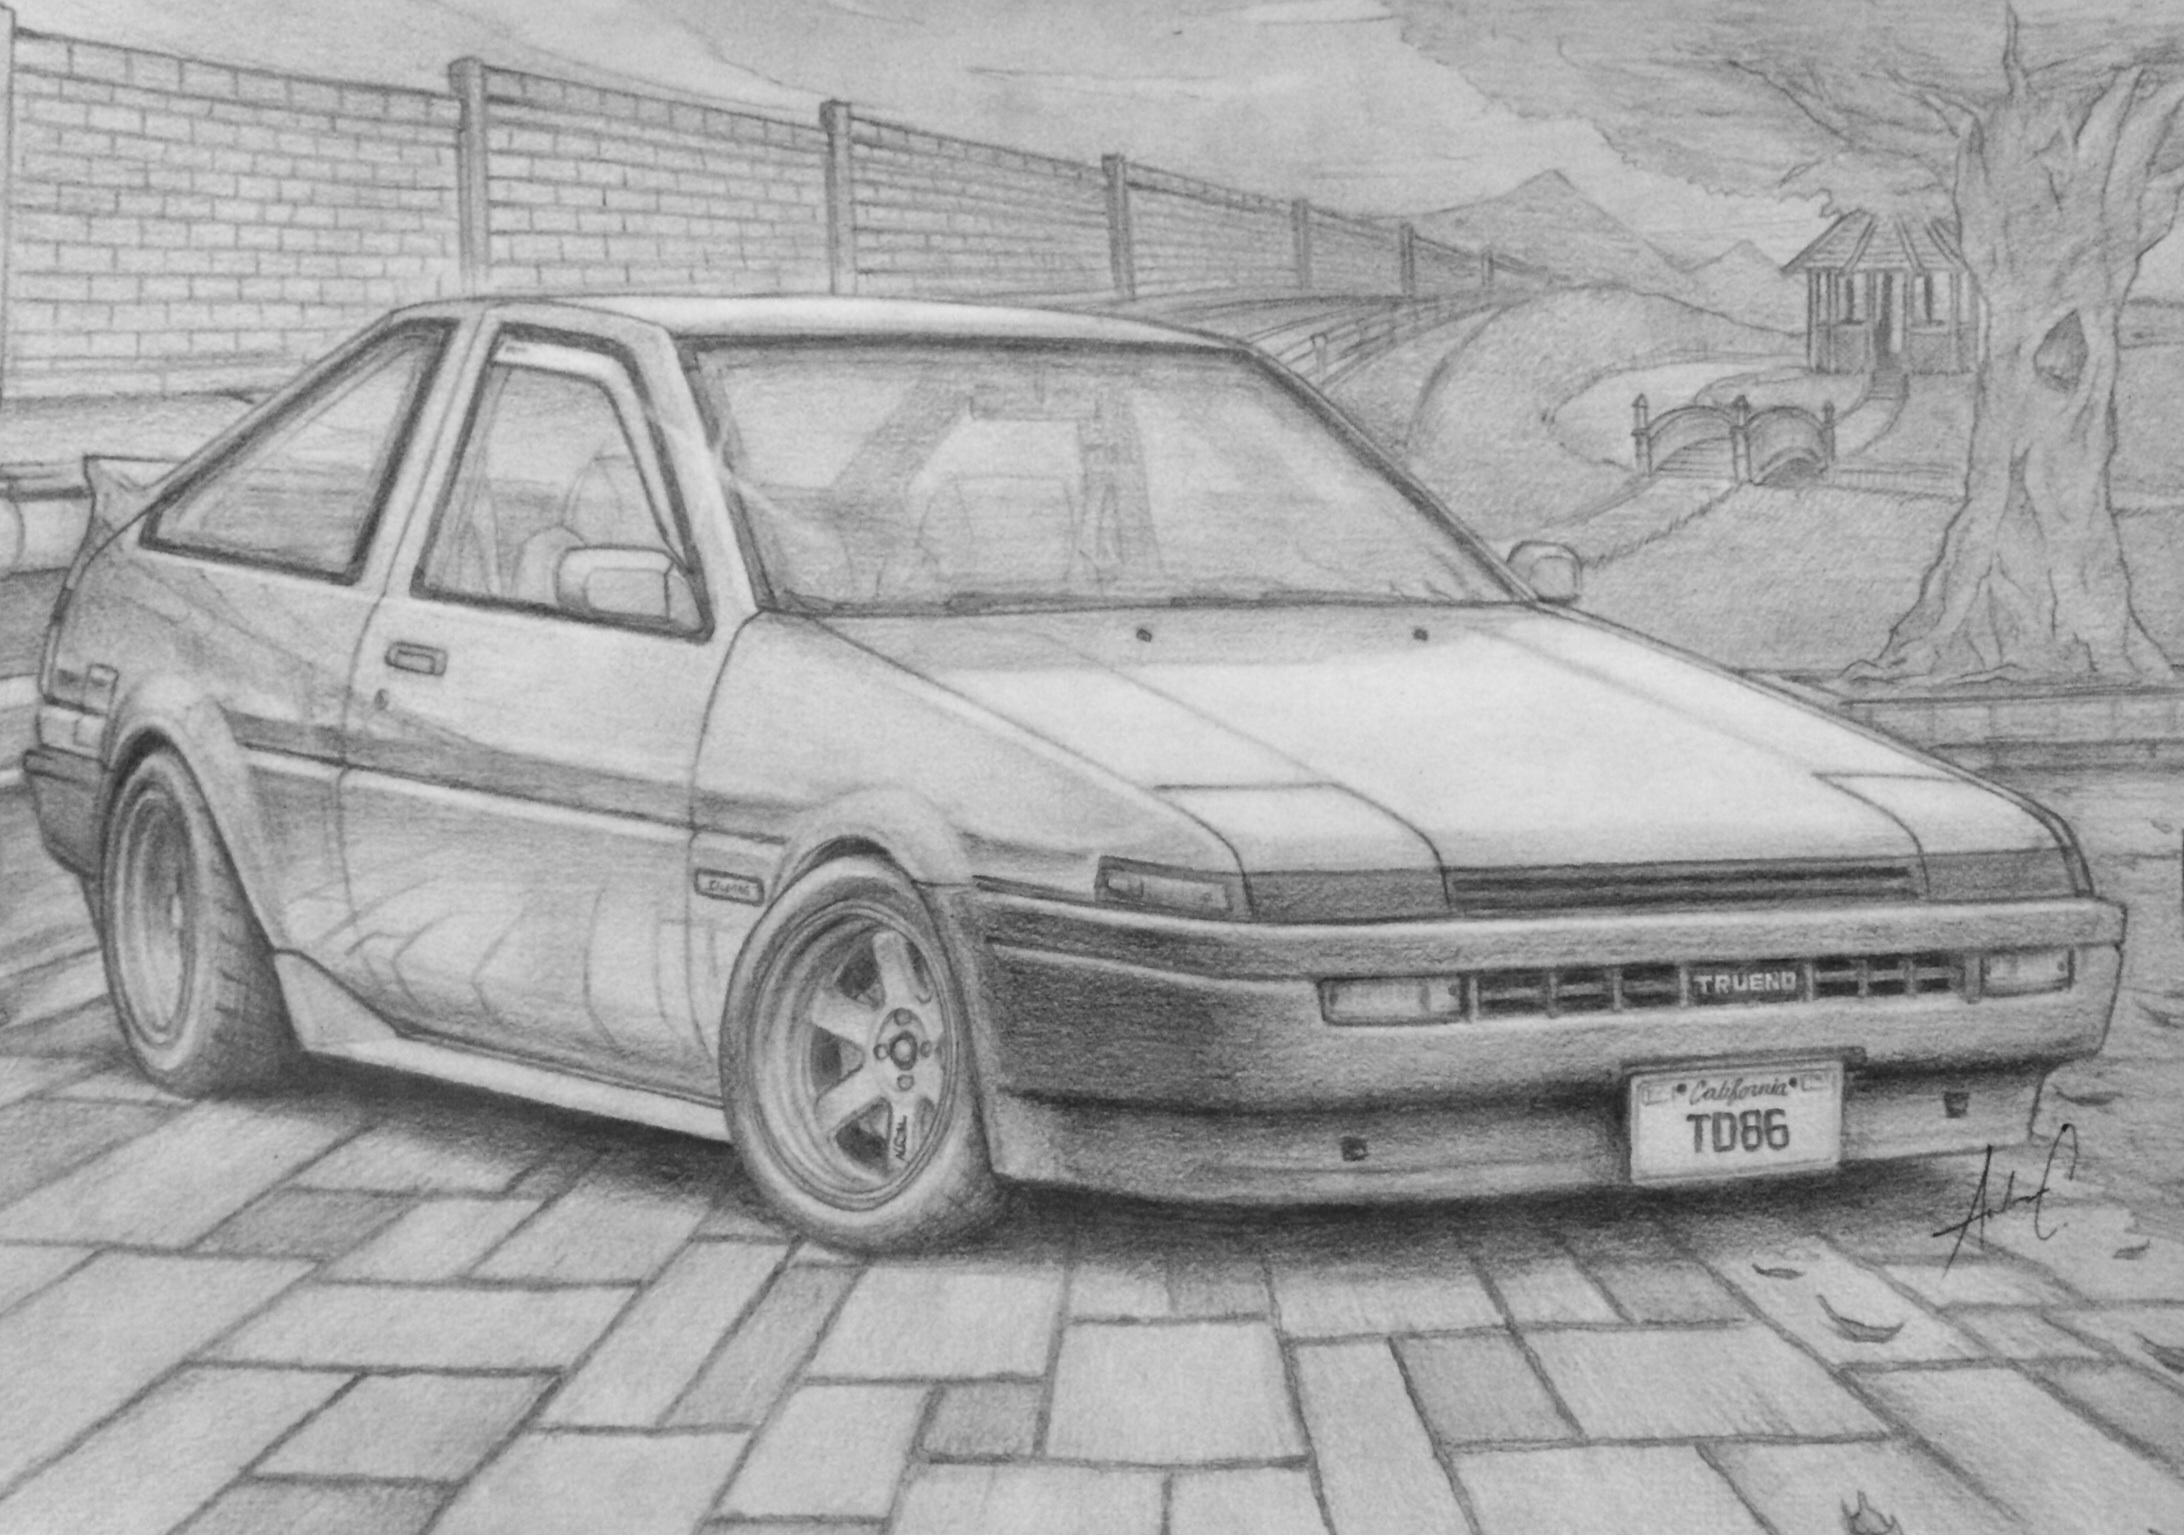 INITIAL D- Toyota AE86 Sketch+time-lapse - Forums 